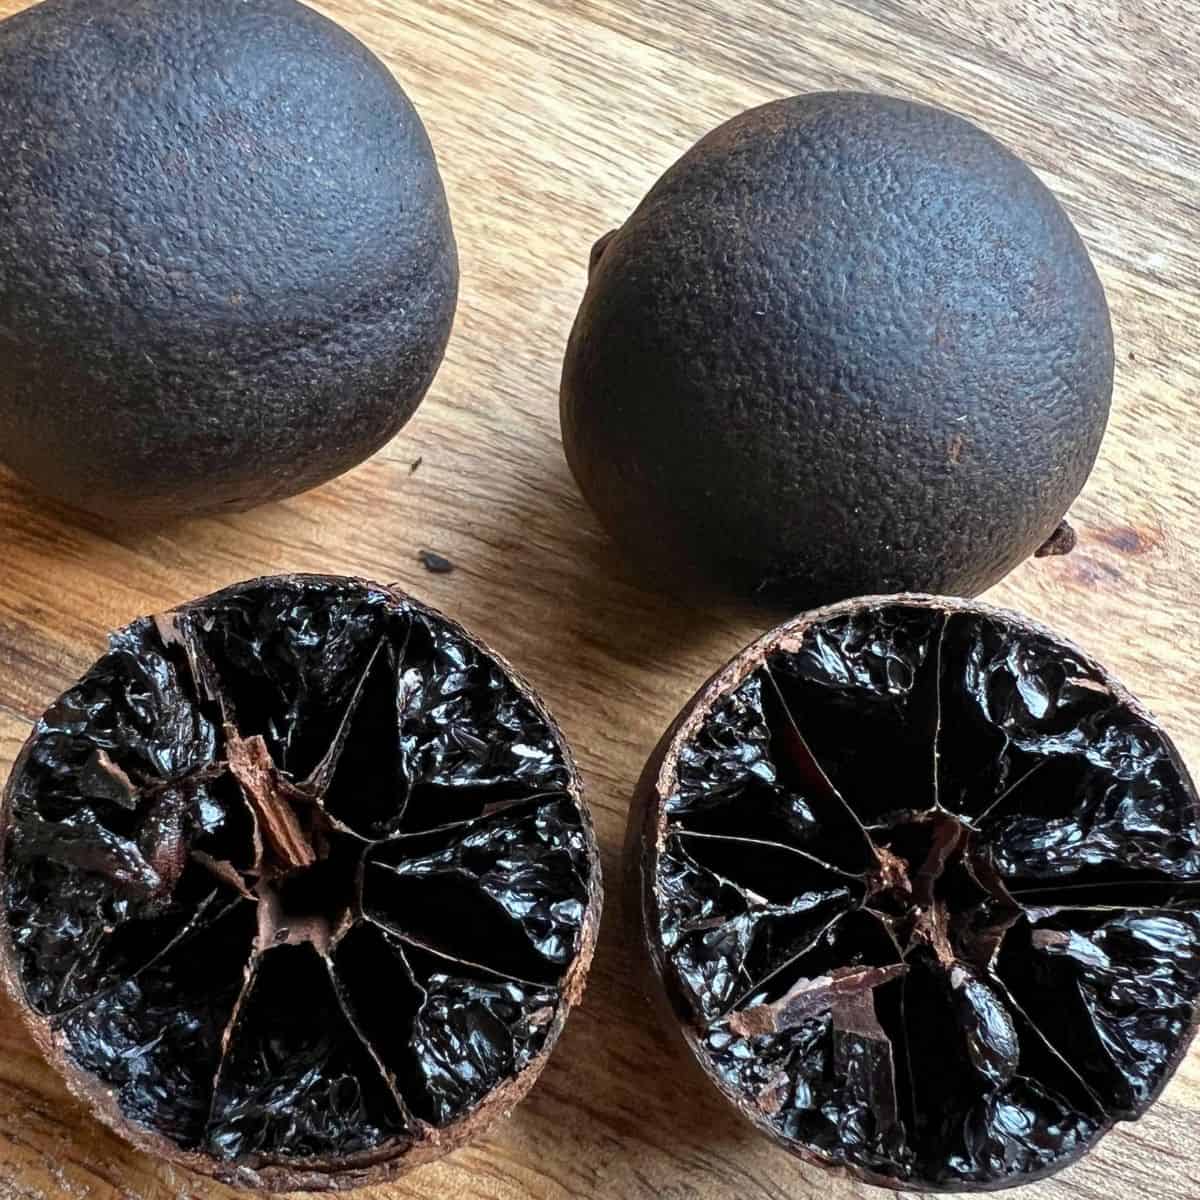 Dried black lime cut in half showing interior.